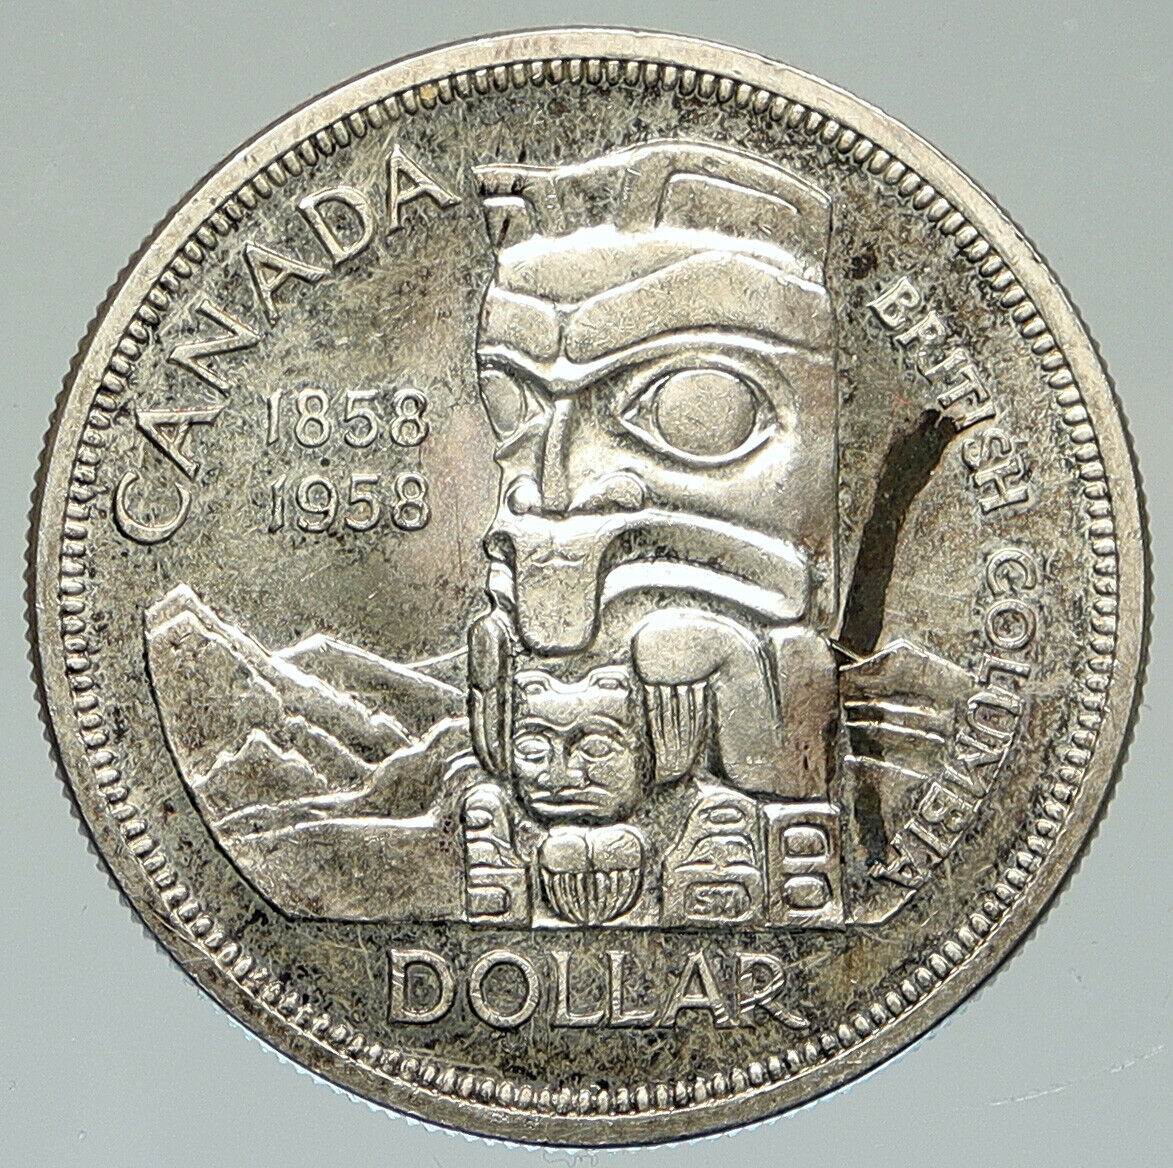 1958 CANADA British Columbia Centennial Totem Pole Large OLD Silver Coin i112045